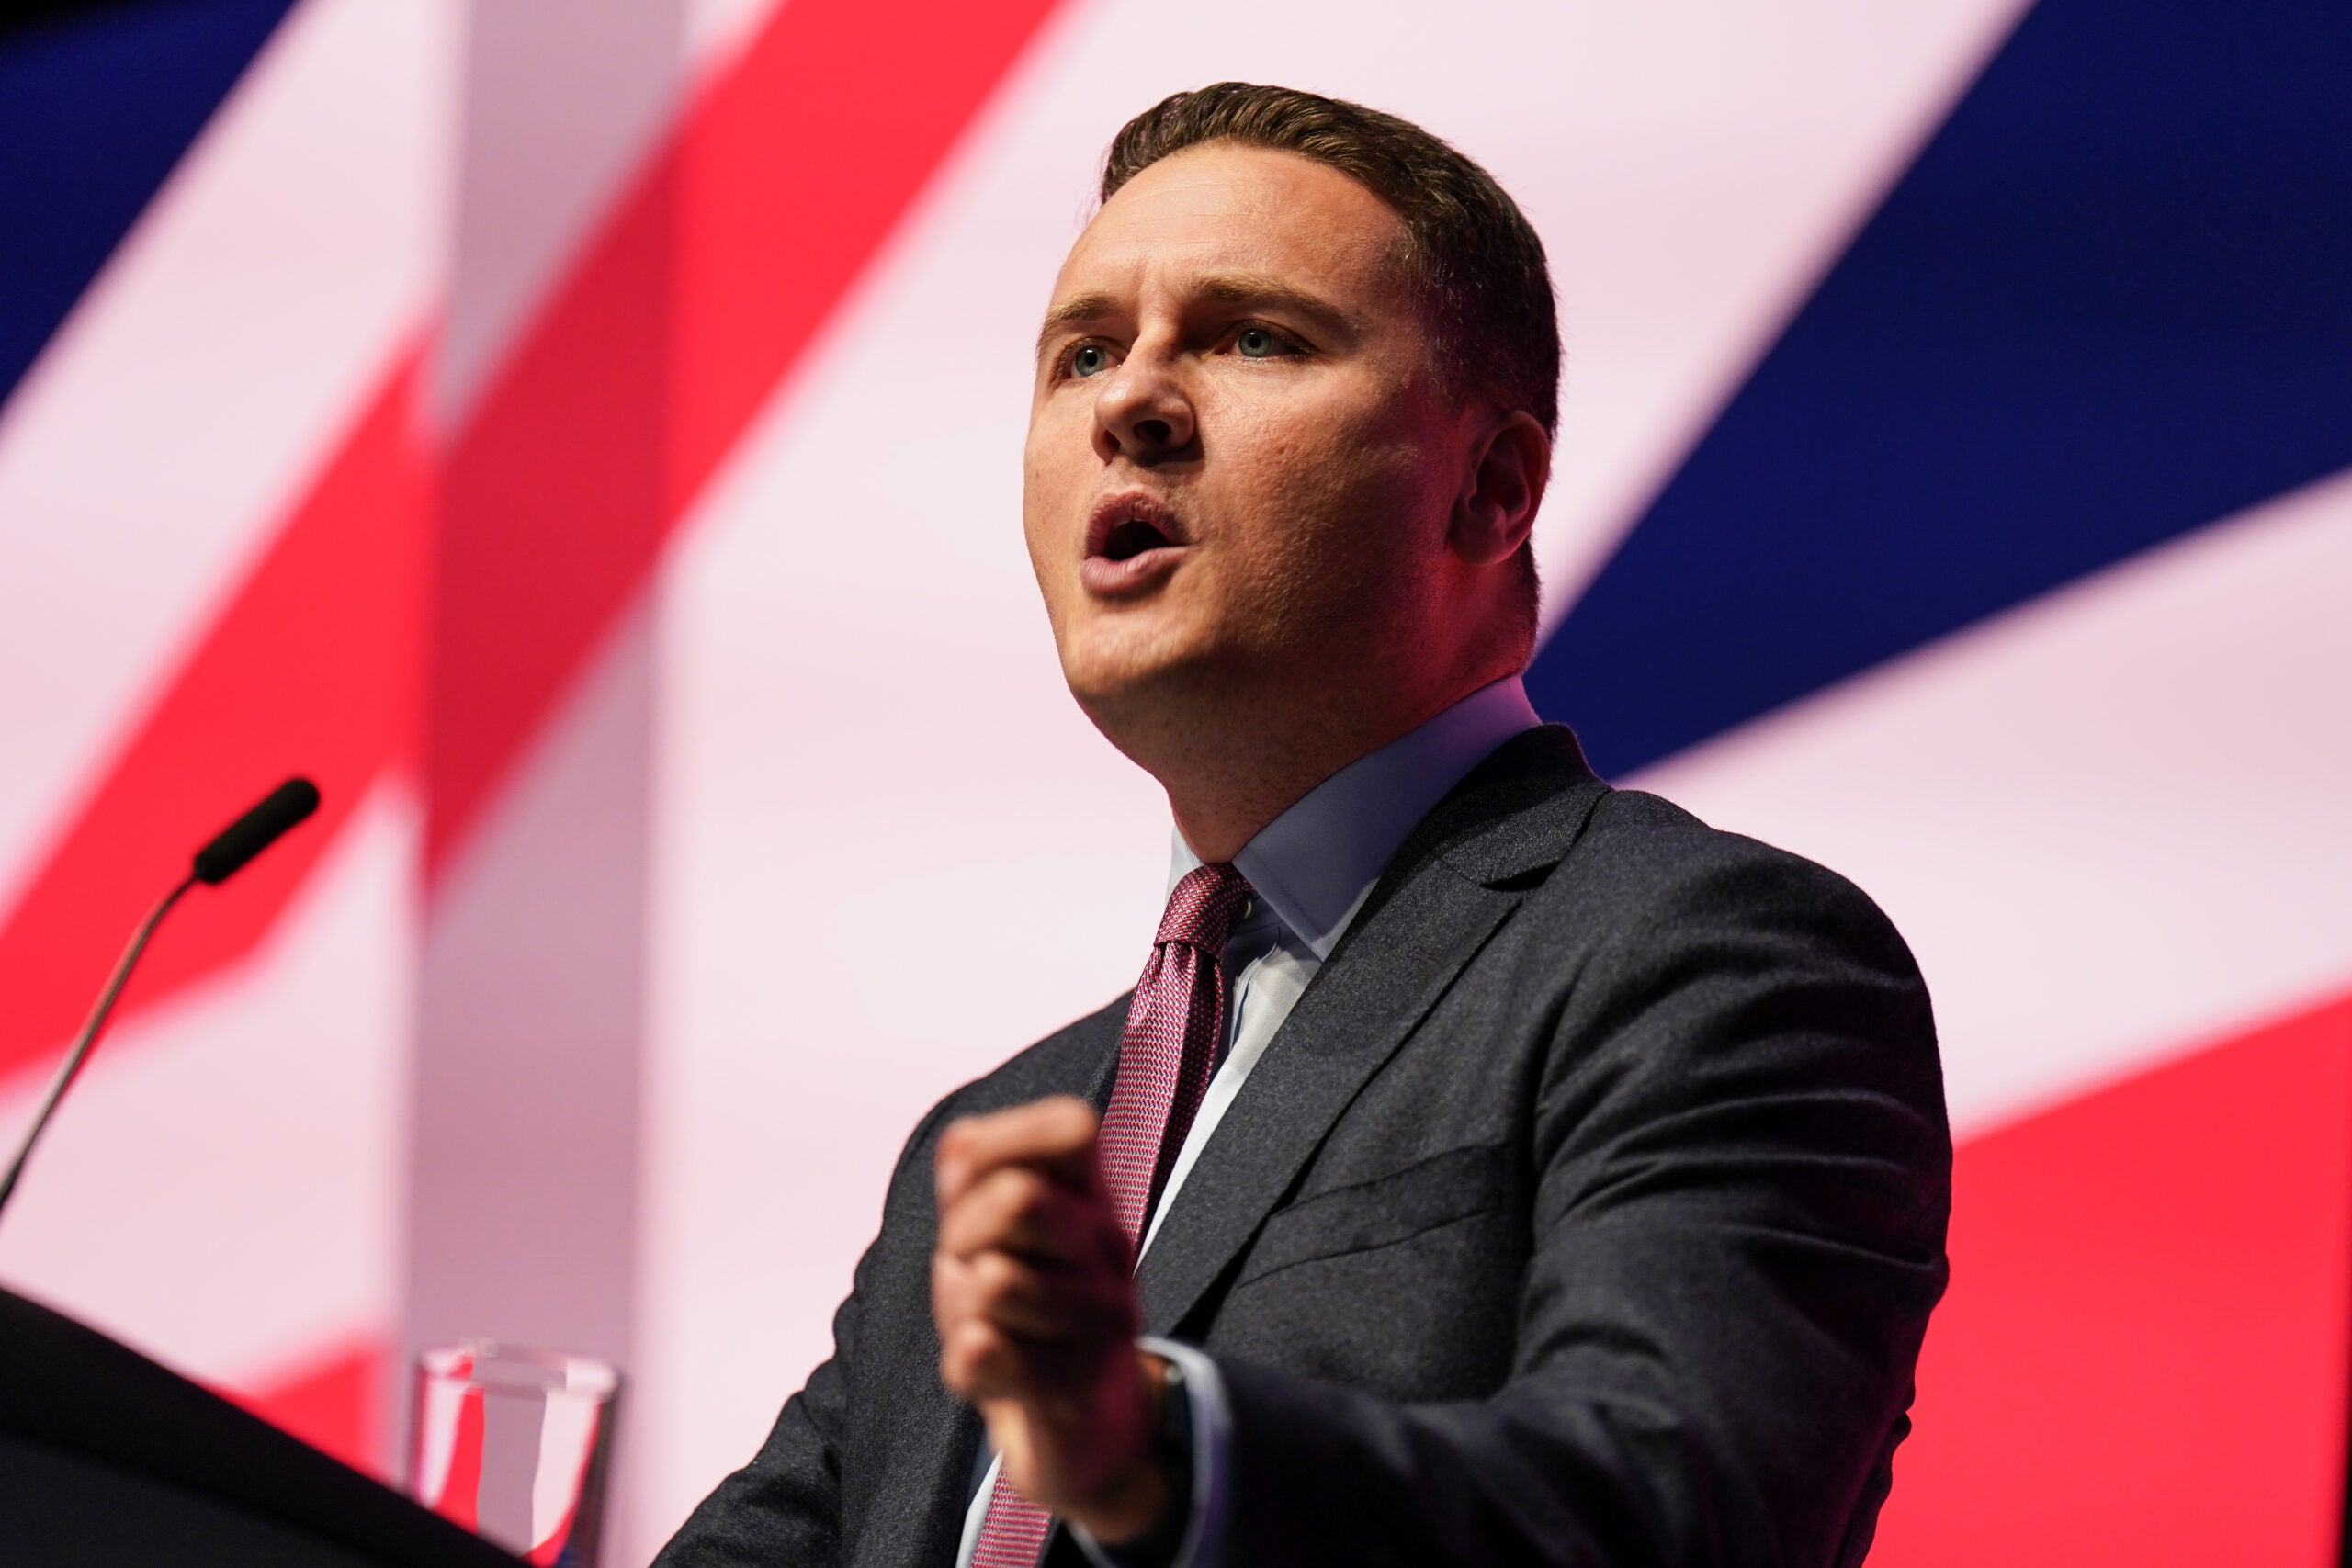 Wes Streeting: “After a decade of decline, Labour will make the NHS fit for the future”